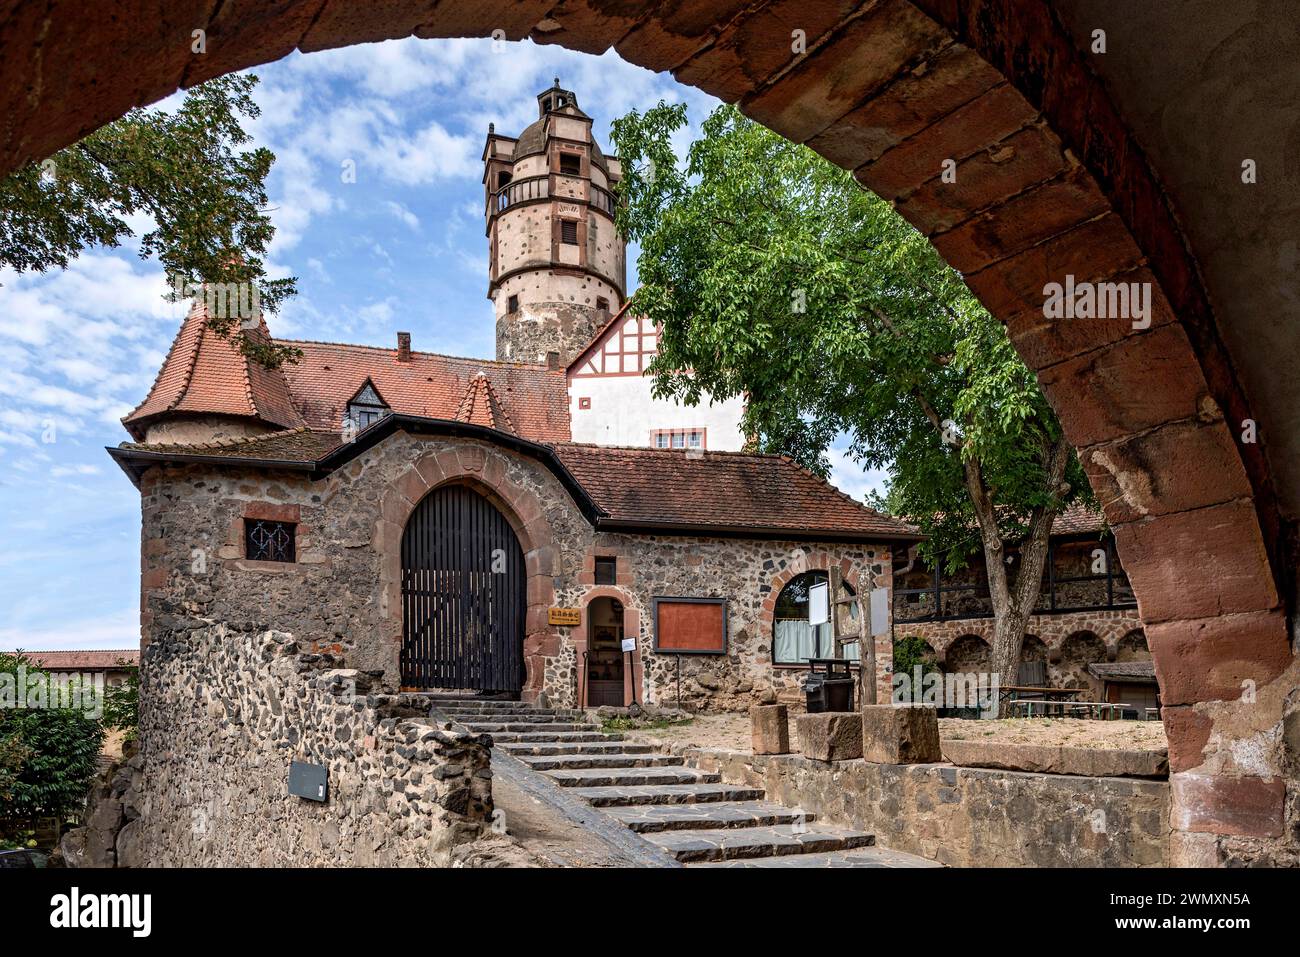 1st and 2nd gatehouse, castle gate, entrance with ticket office to the museum, keep castle tower, Ronneburg Castle, medieval knight's castle Stock Photo